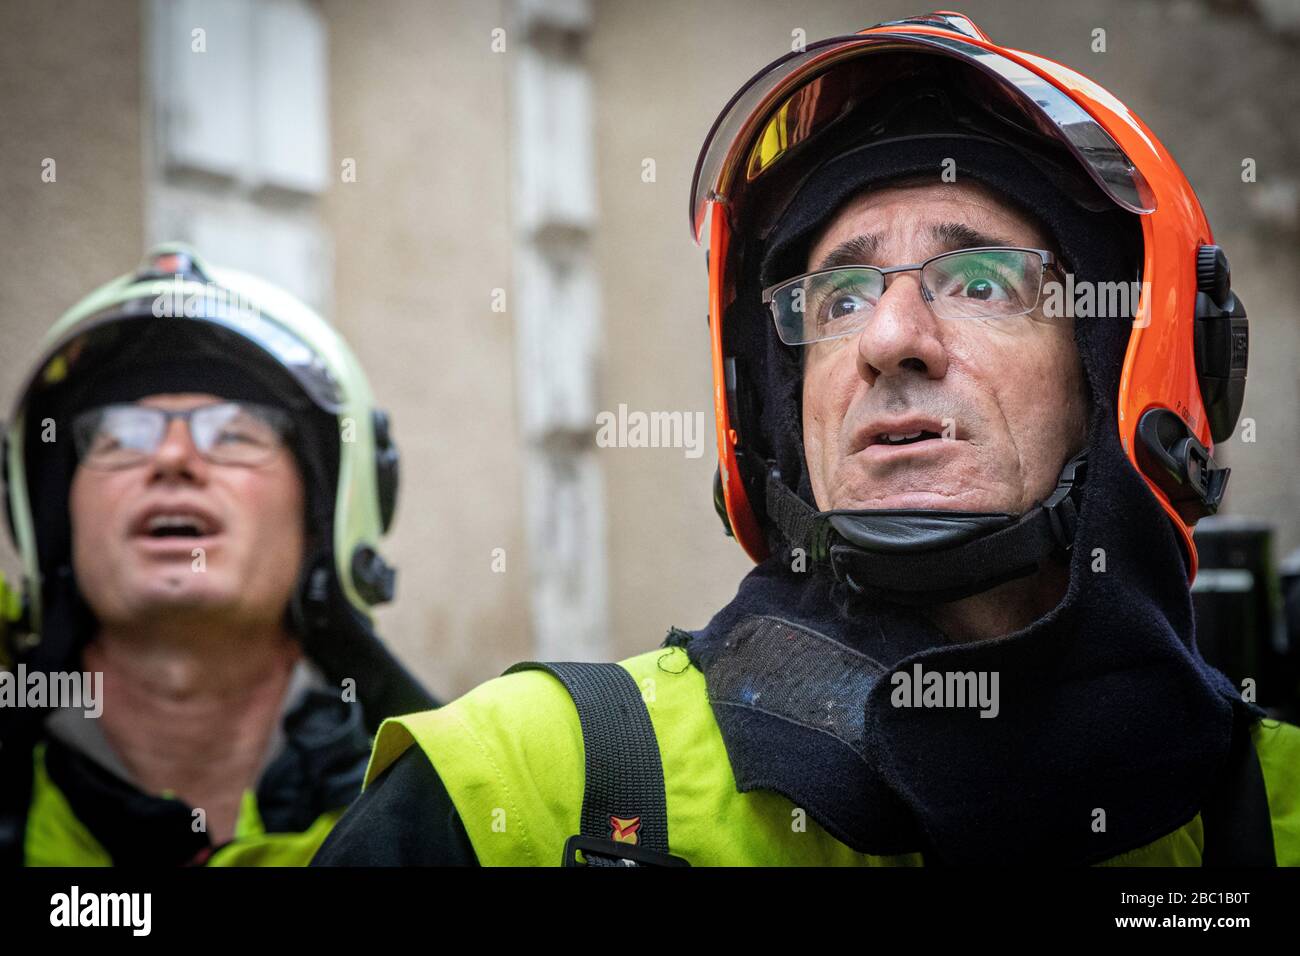 COMMANDER OF THE RESCUE OPERATIONS(ORANGE HELMET) WITH HIS MEN, INTERVENTION FOR AN APARTMENT FIRE IN THE CITY CENTER, FIREFIGHTERS FROM THE EMERGENCY SERVICES, AUXERRE, YONNE, FRANCE Stock Photo